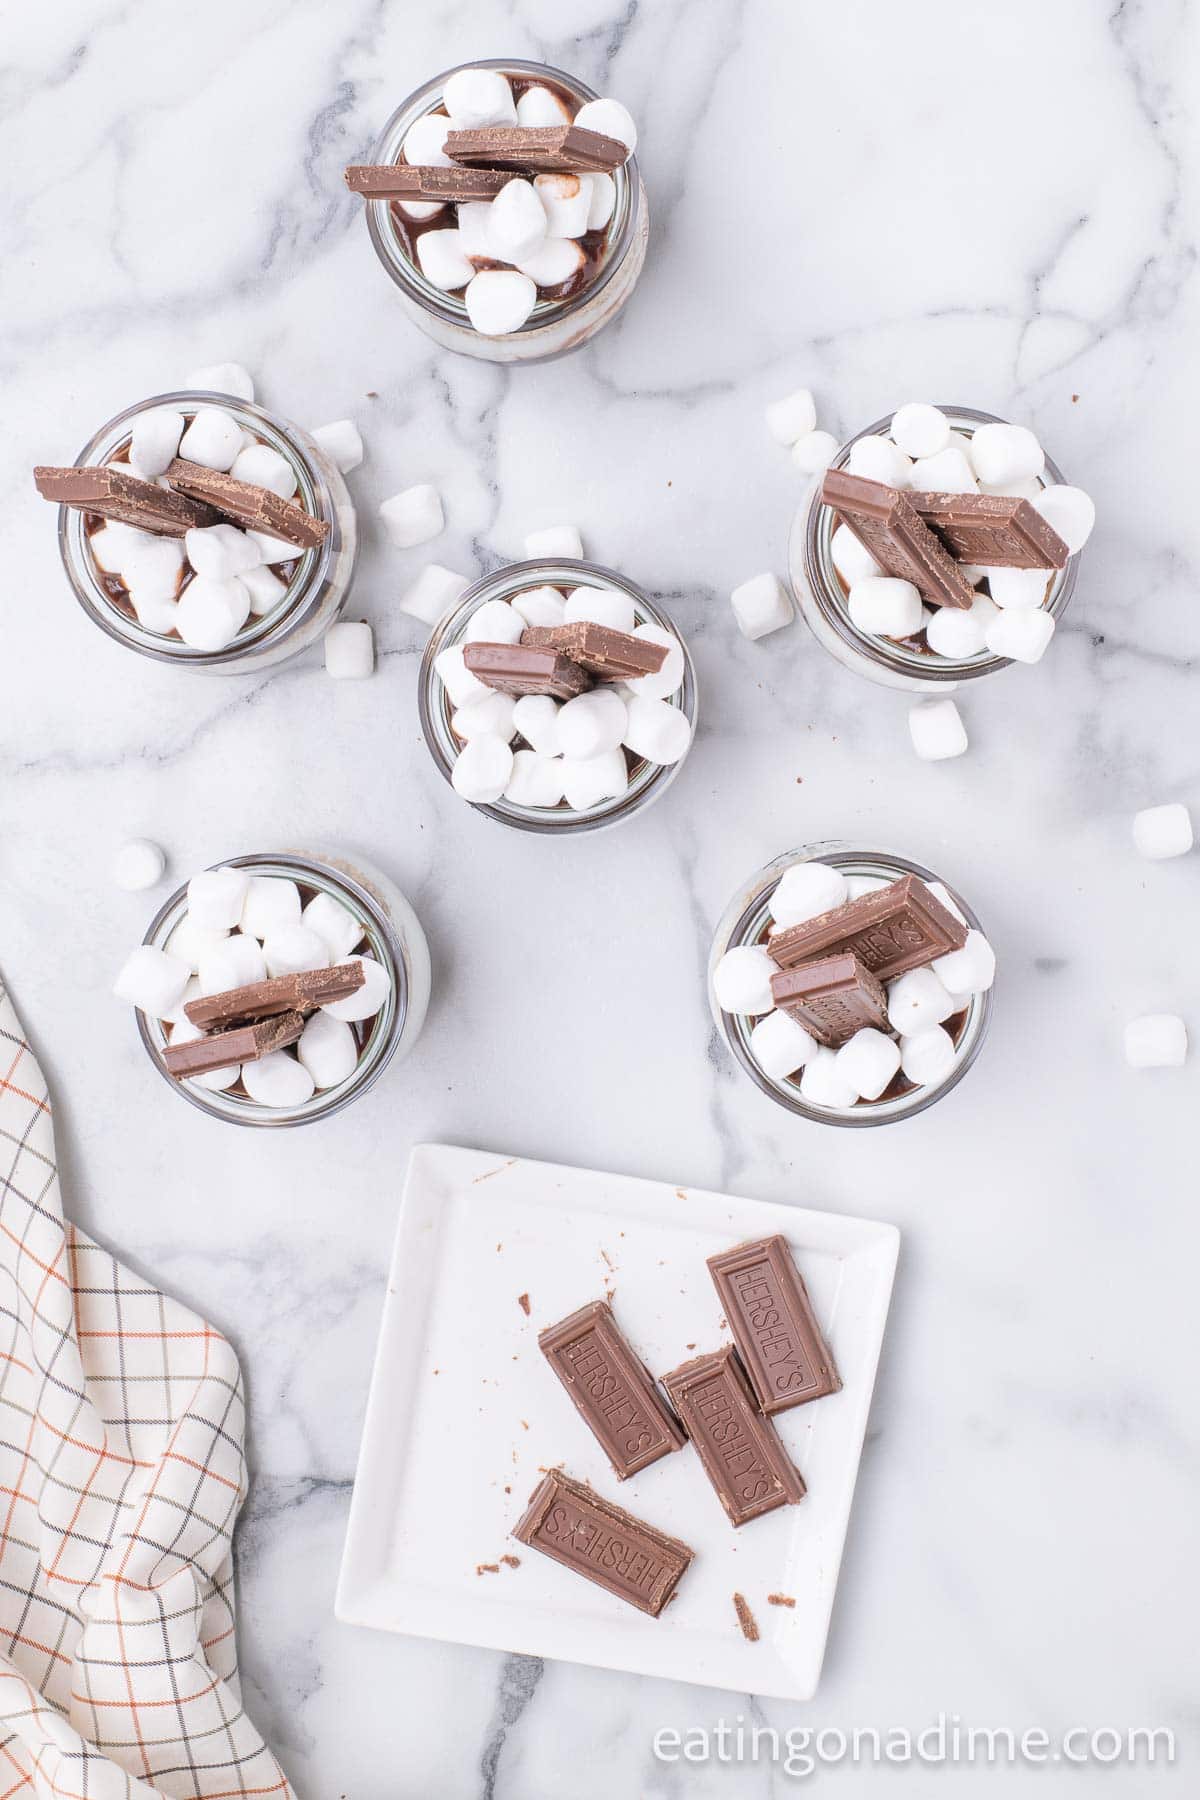 Topping jars with marshmallows and chocolate bars